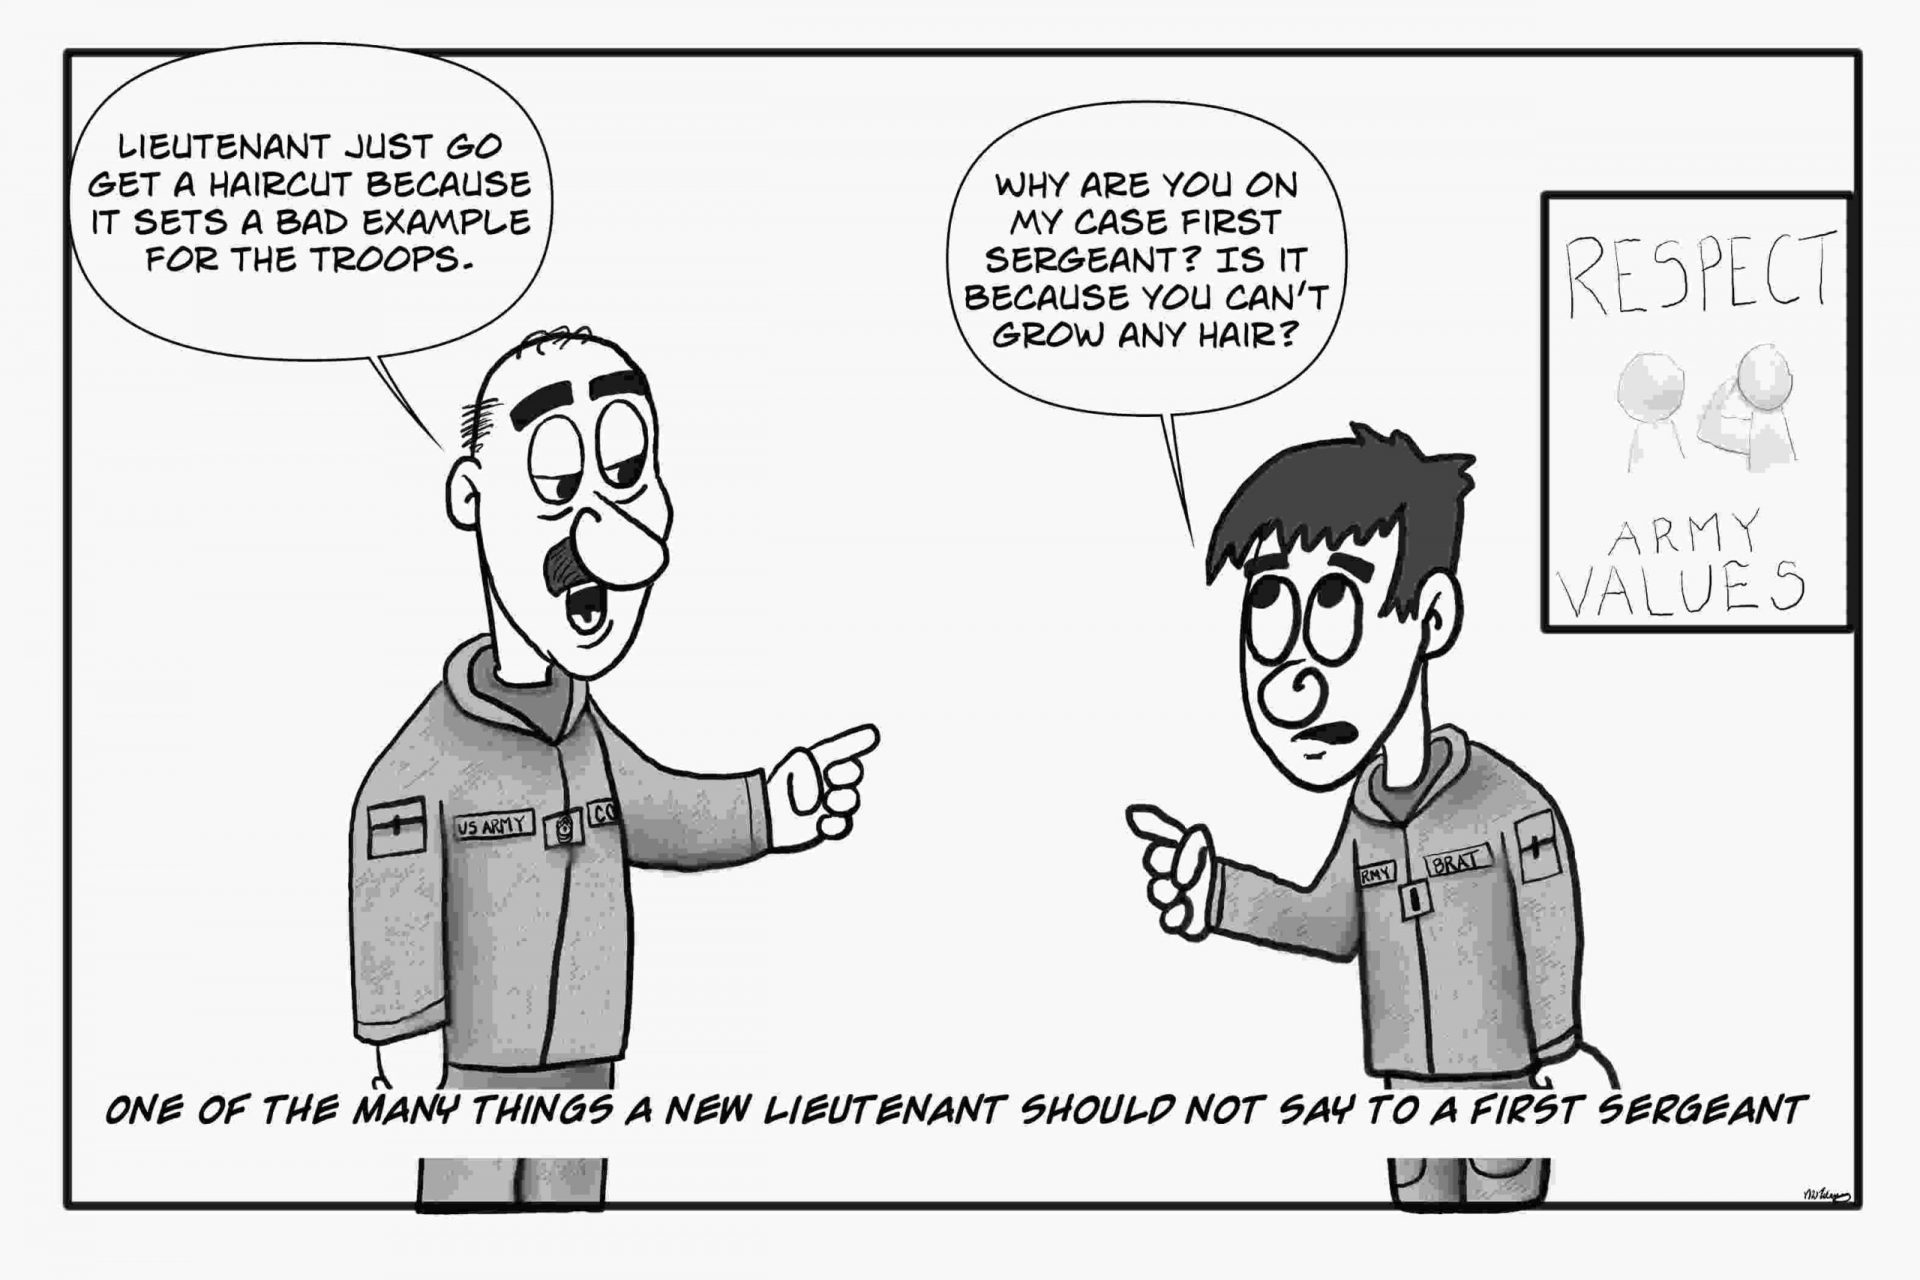 A lieutenant talking back to an army first sergeant is not a good idea.